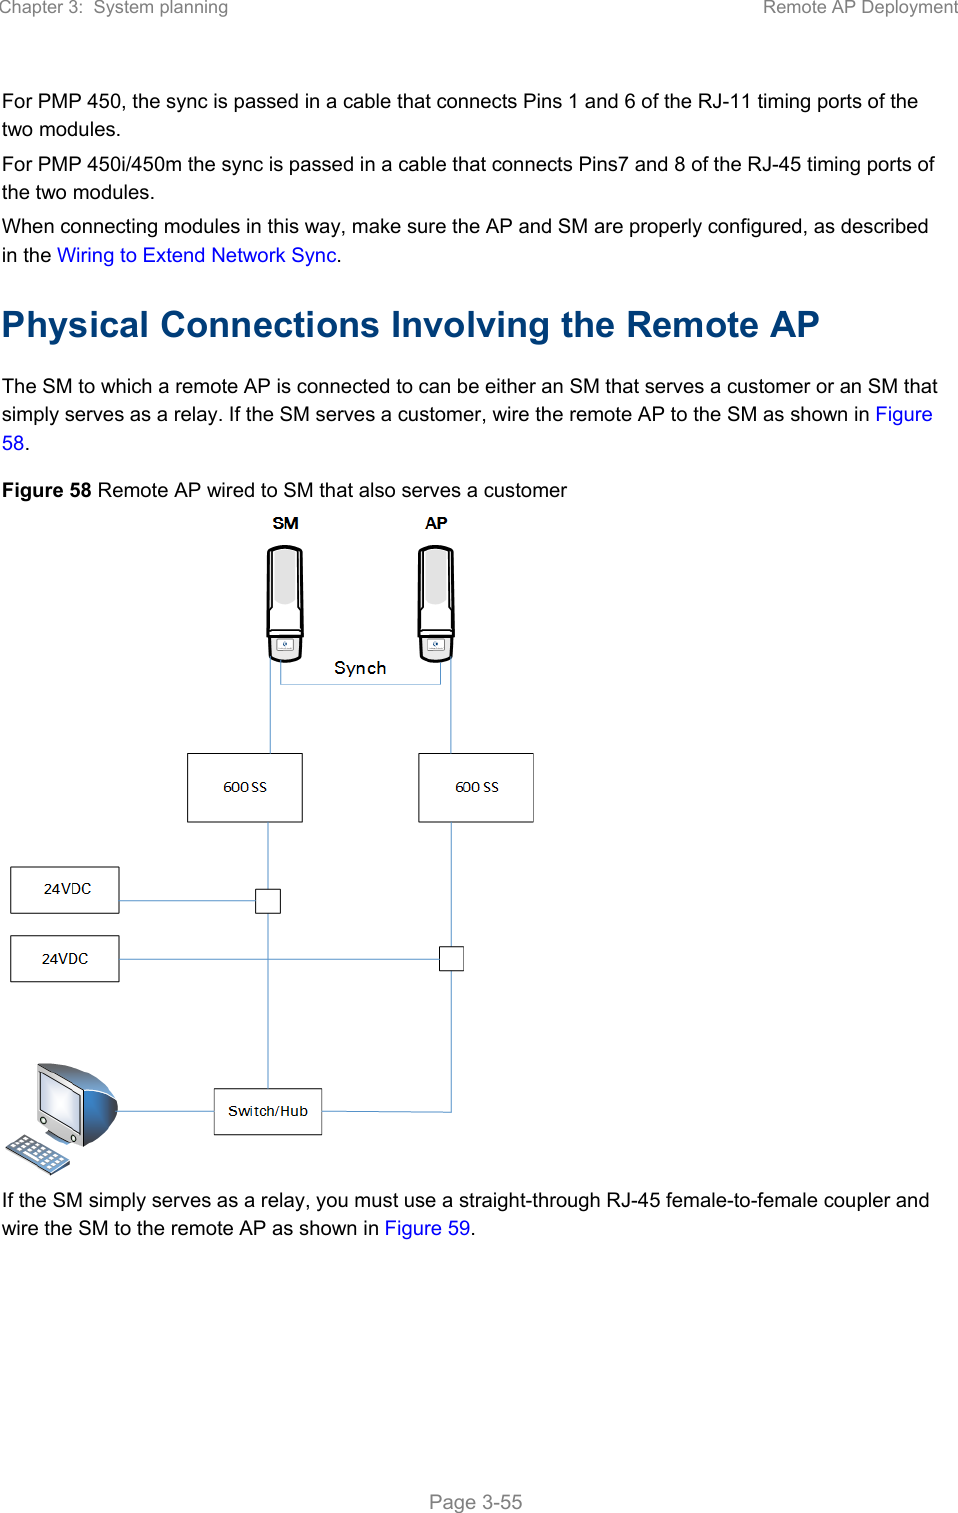 Chapter 3:  System planning  Remote AP Deployment   Page 3-55 For PMP 450, the sync is passed in a cable that connects Pins 1 and 6 of the RJ-11 timing ports of the two modules.  For PMP 450i/450m the sync is passed in a cable that connects Pins7 and 8 of the RJ-45 timing ports of the two modules. When connecting modules in this way, make sure the AP and SM are properly configured, as described in the Wiring to Extend Network Sync. Physical Connections Involving the Remote AP The SM to which a remote AP is connected to can be either an SM that serves a customer or an SM that simply serves as a relay. If the SM serves a customer, wire the remote AP to the SM as shown in Figure 58. Figure 58 Remote AP wired to SM that also serves a customer  If the SM simply serves as a relay, you must use a straight-through RJ-45 female-to-female coupler and wire the SM to the remote AP as shown in Figure 59. 